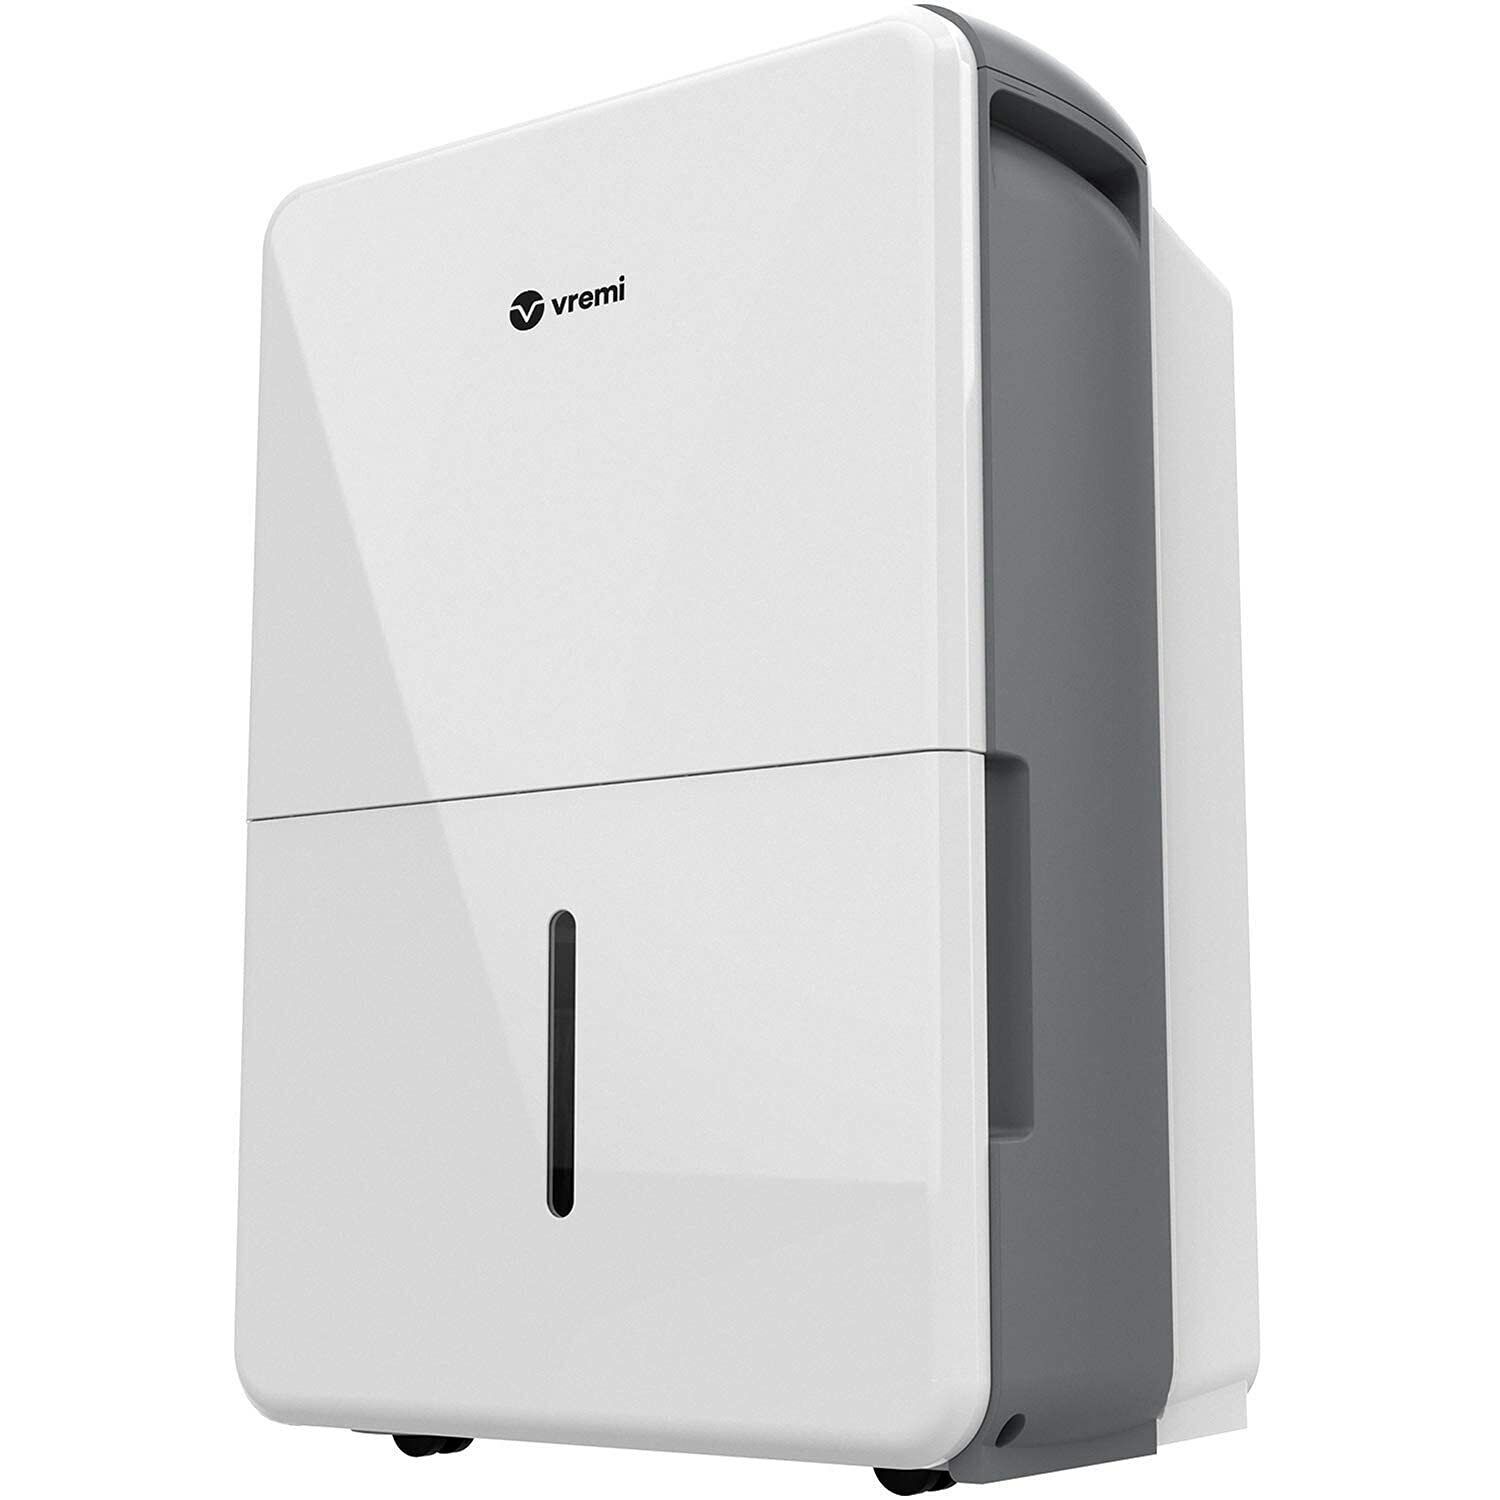 Vremi 35 Pint 3,000 Sq. Ft. Dehumidifier Energy Star Rated for Medium Spaces